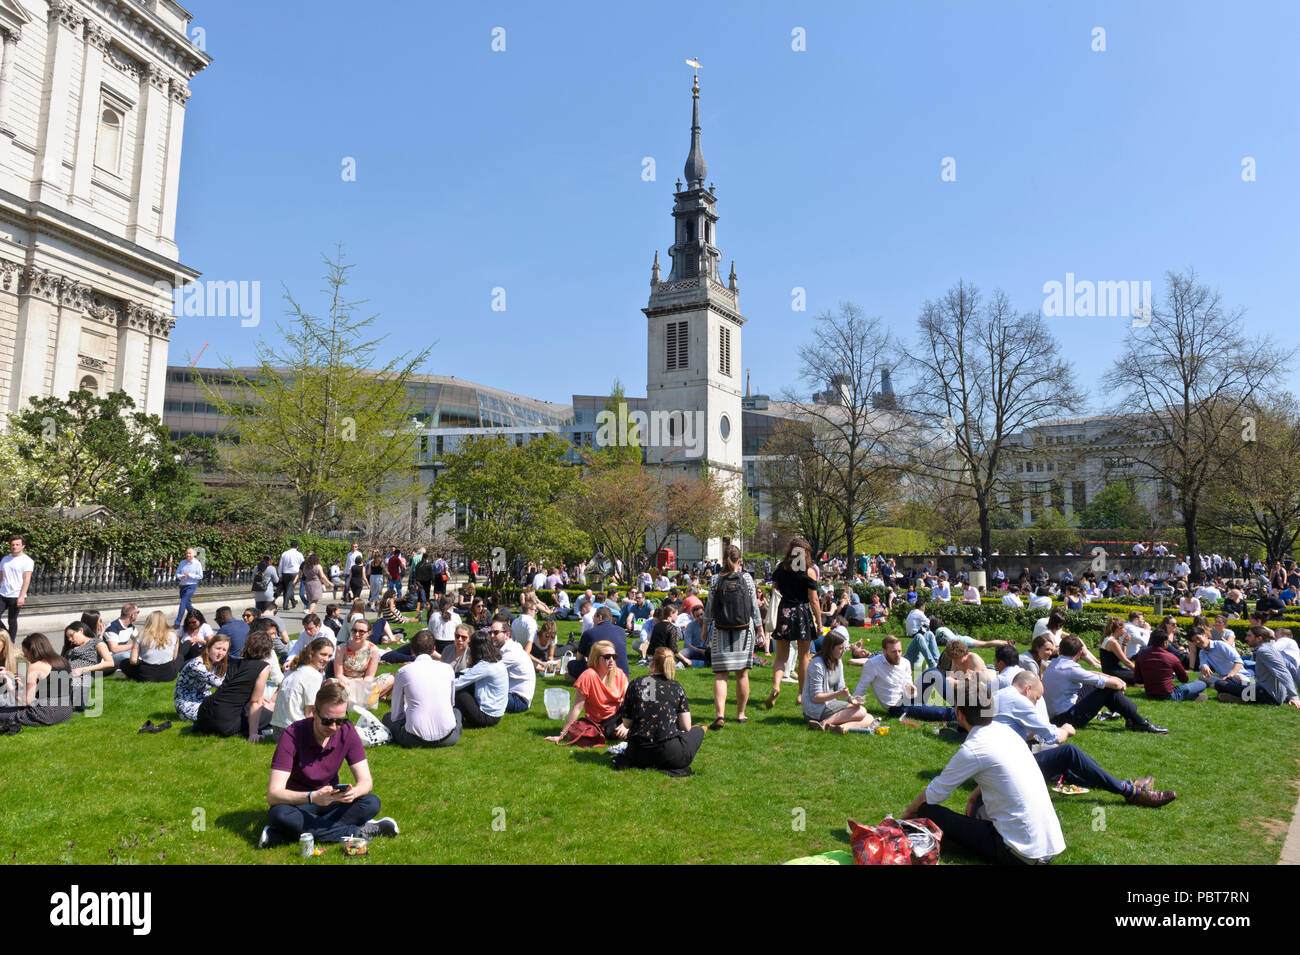 People gathered in a garden near St Paul's Cathedral to enjoy the hot British summer, London, England Stock Photo